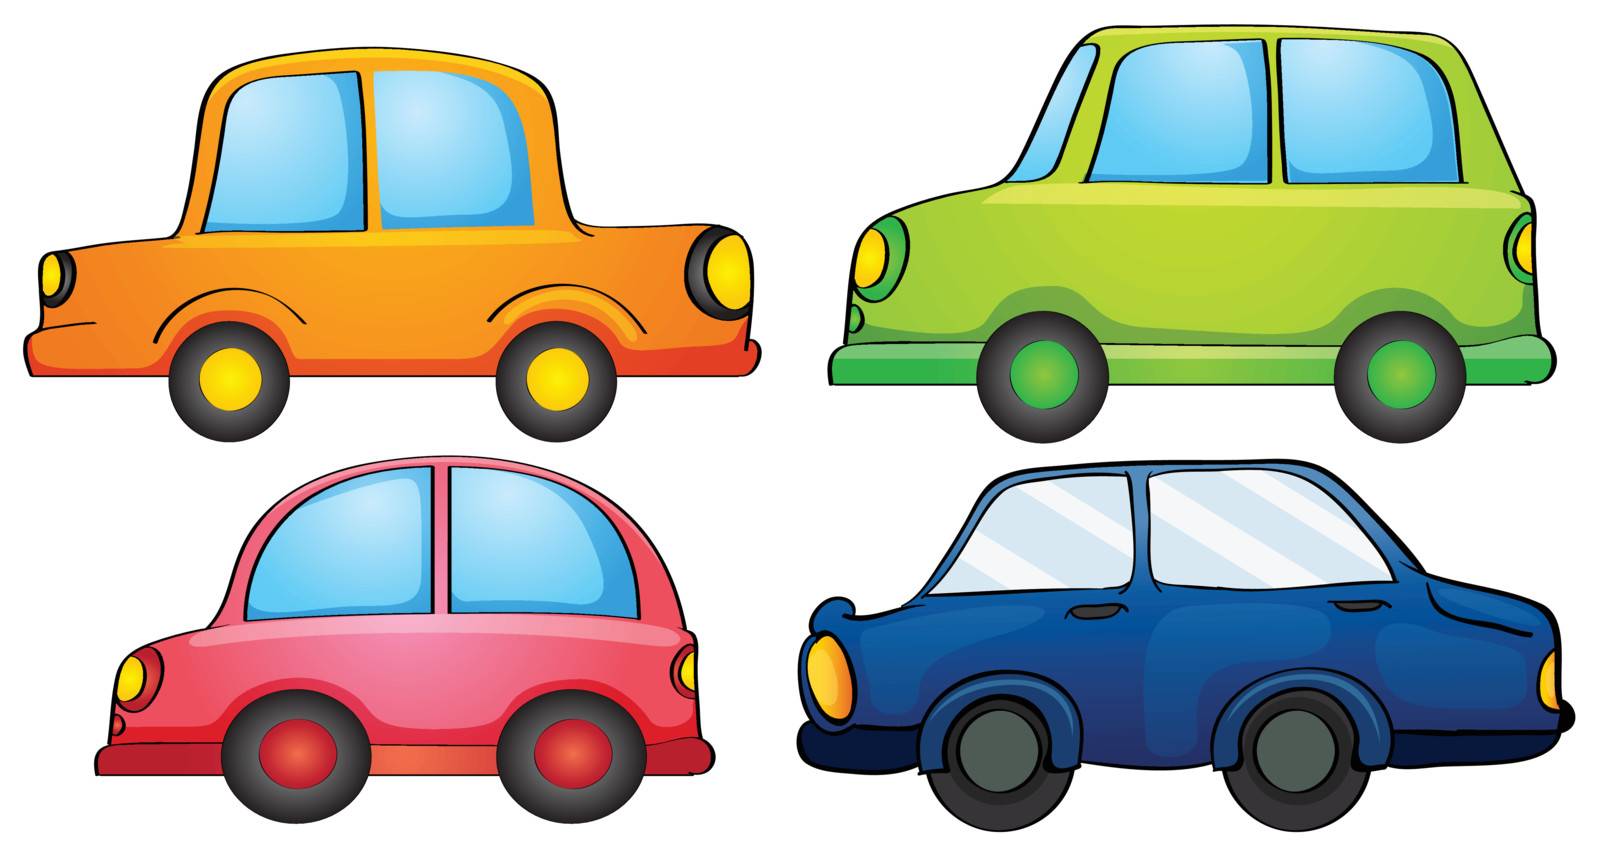 Illustration of the different designs and colors of a transportation on a white background